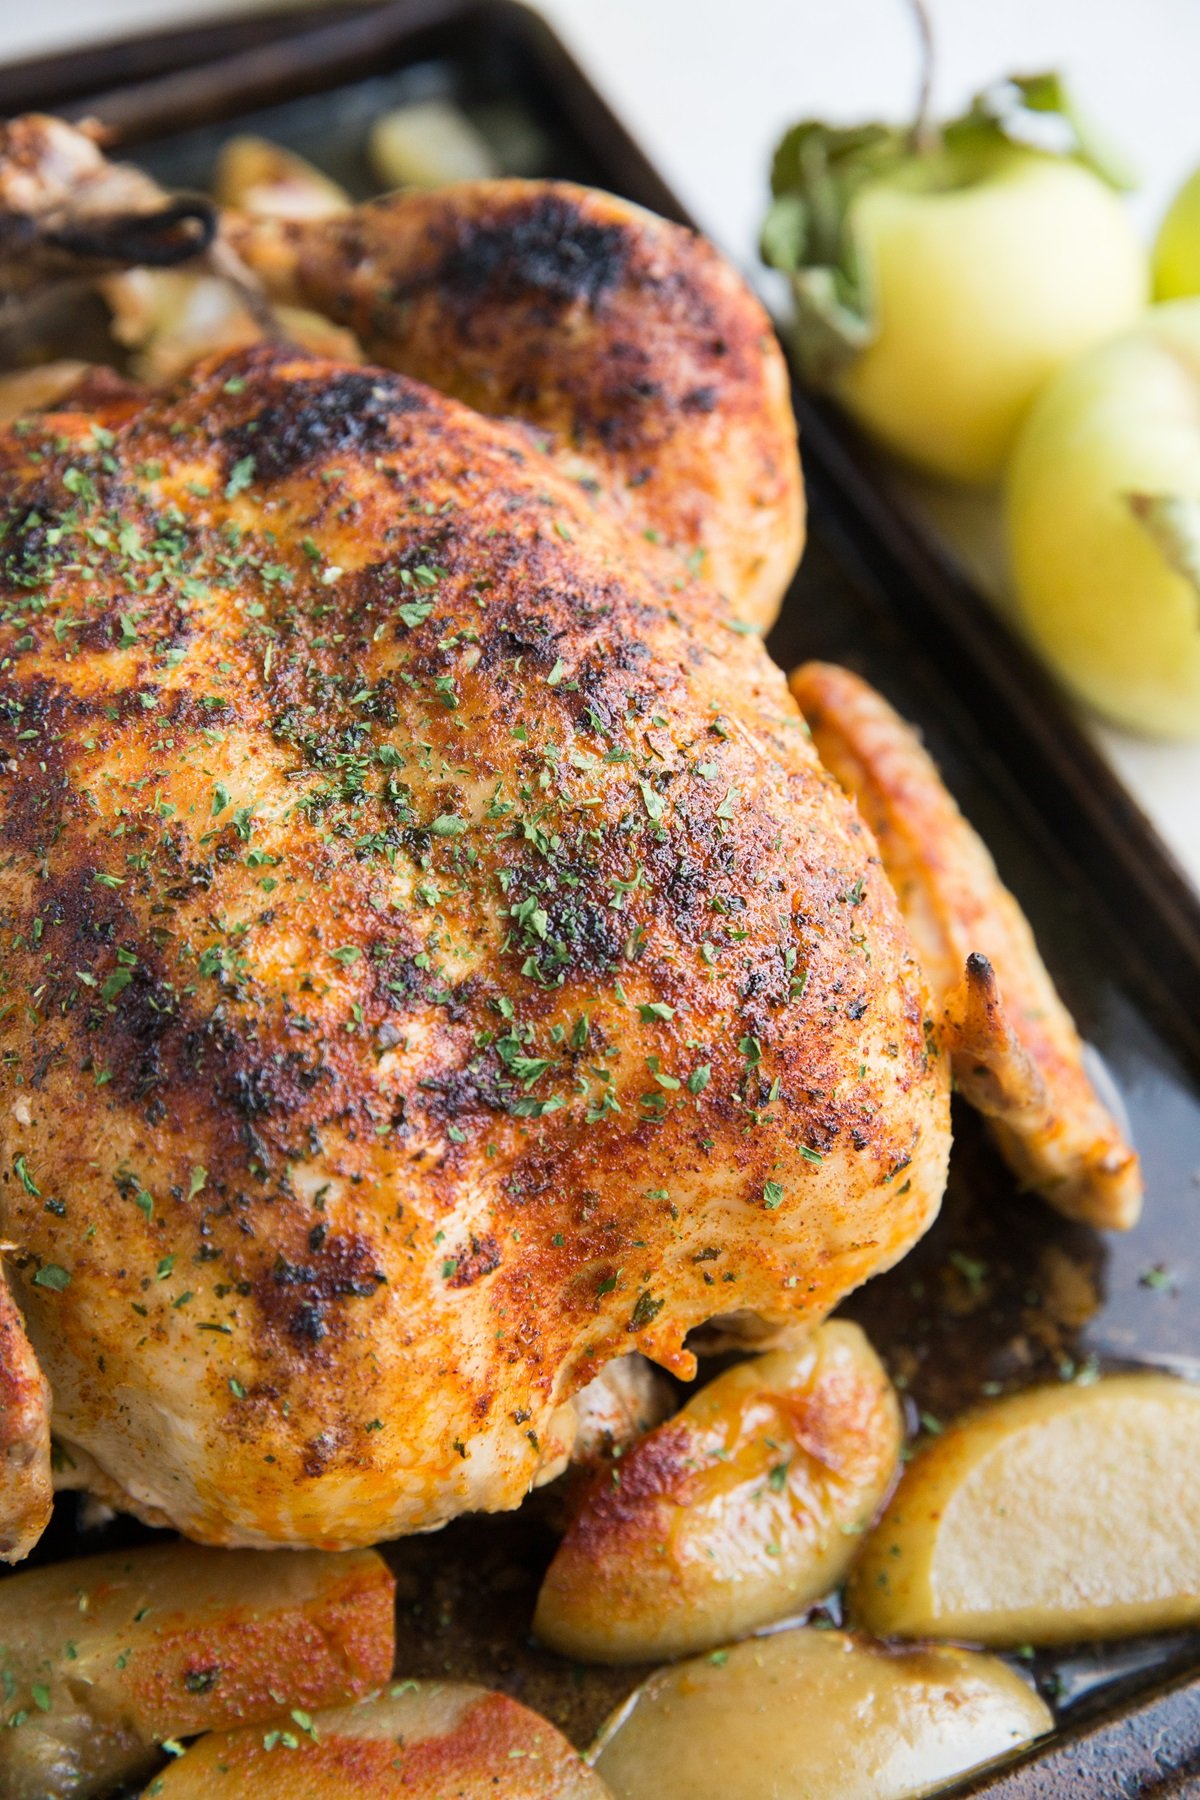 Instant Pot Whole Chicken with apples - an amazingly tender and juicy chicken recipe that tastes like rotisserie chicken!